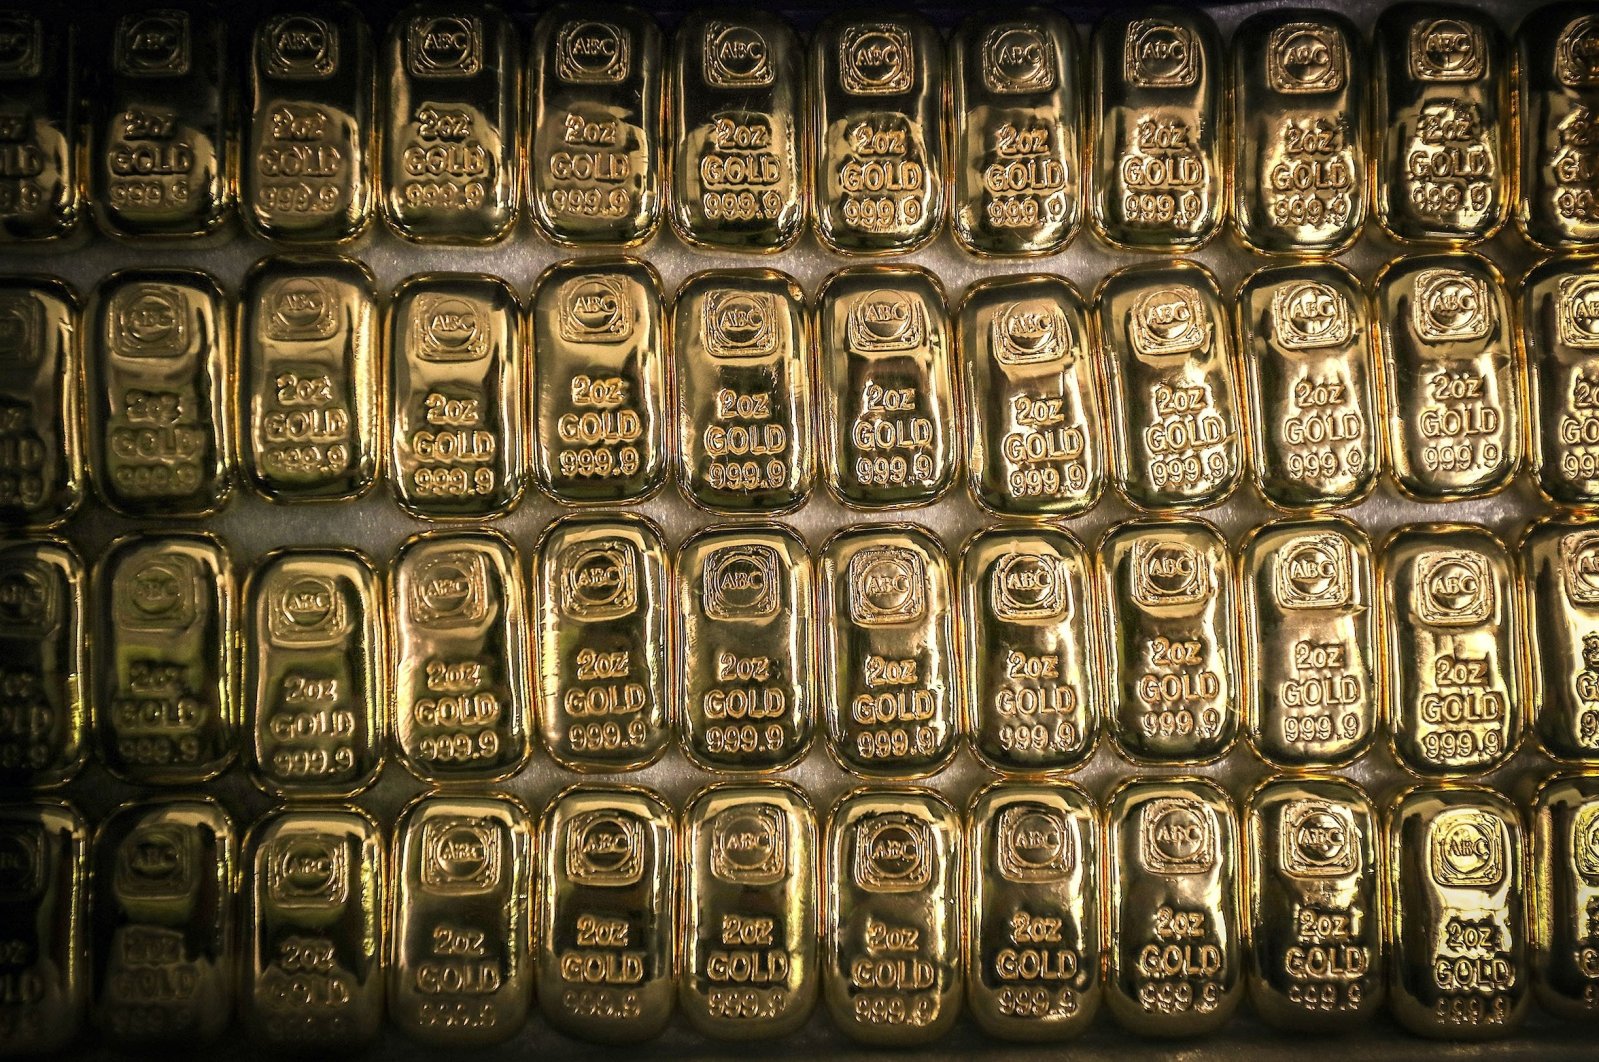 Ounce gold bars are displayed at the ABC Refinery smelter in Sydney, New South Wales, Australia, July 2, 2020. (Getty Images)